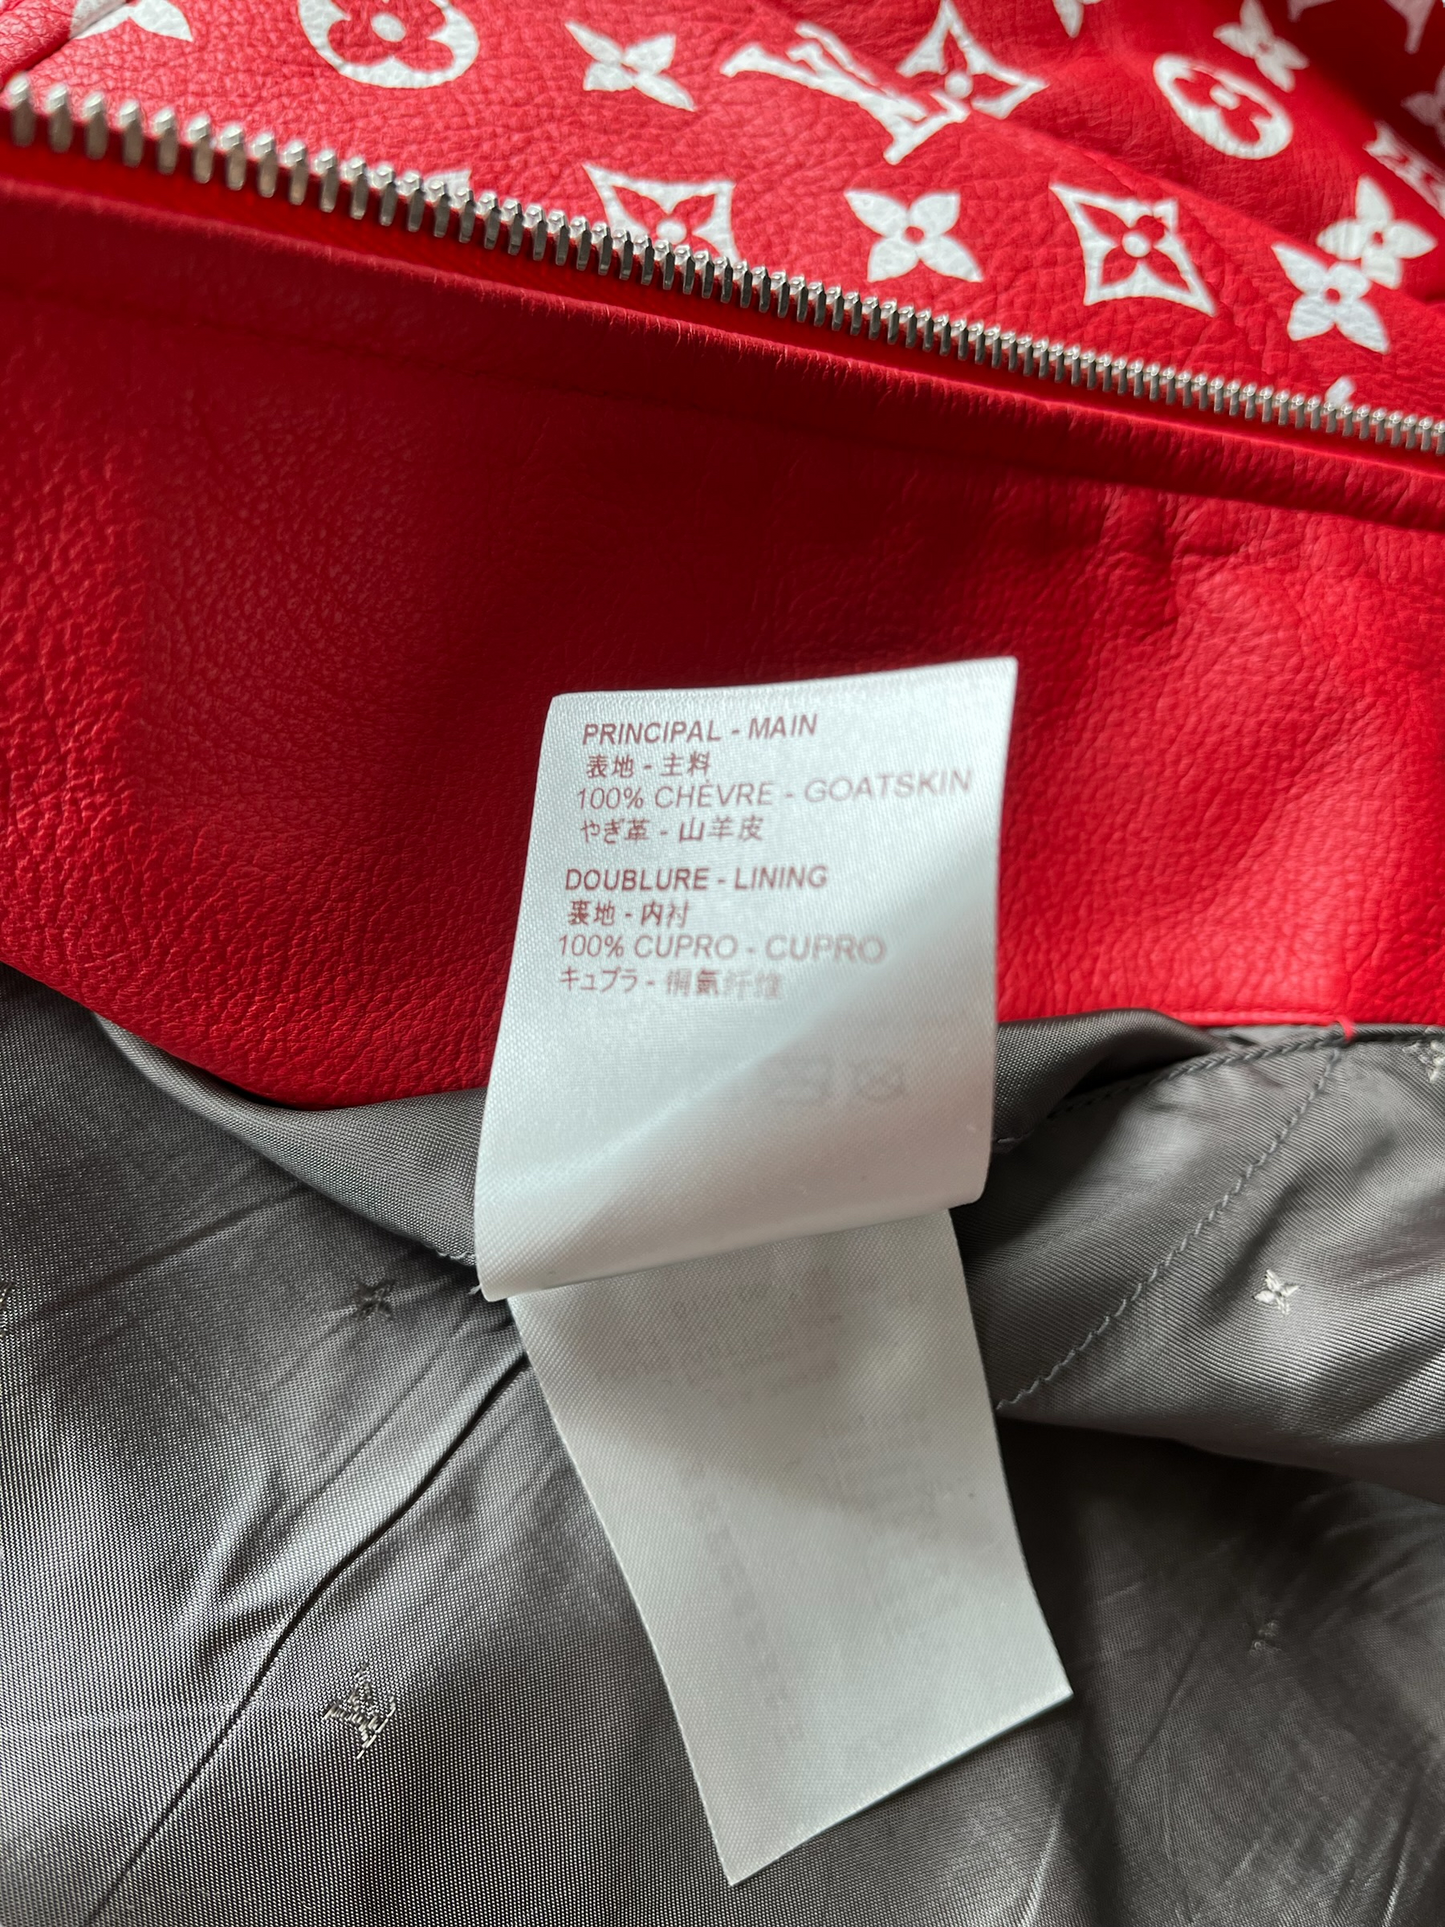 Louis Vuitton X Supreme Leather Baseball Bomber Jacket Red – The Luxury  Shopper